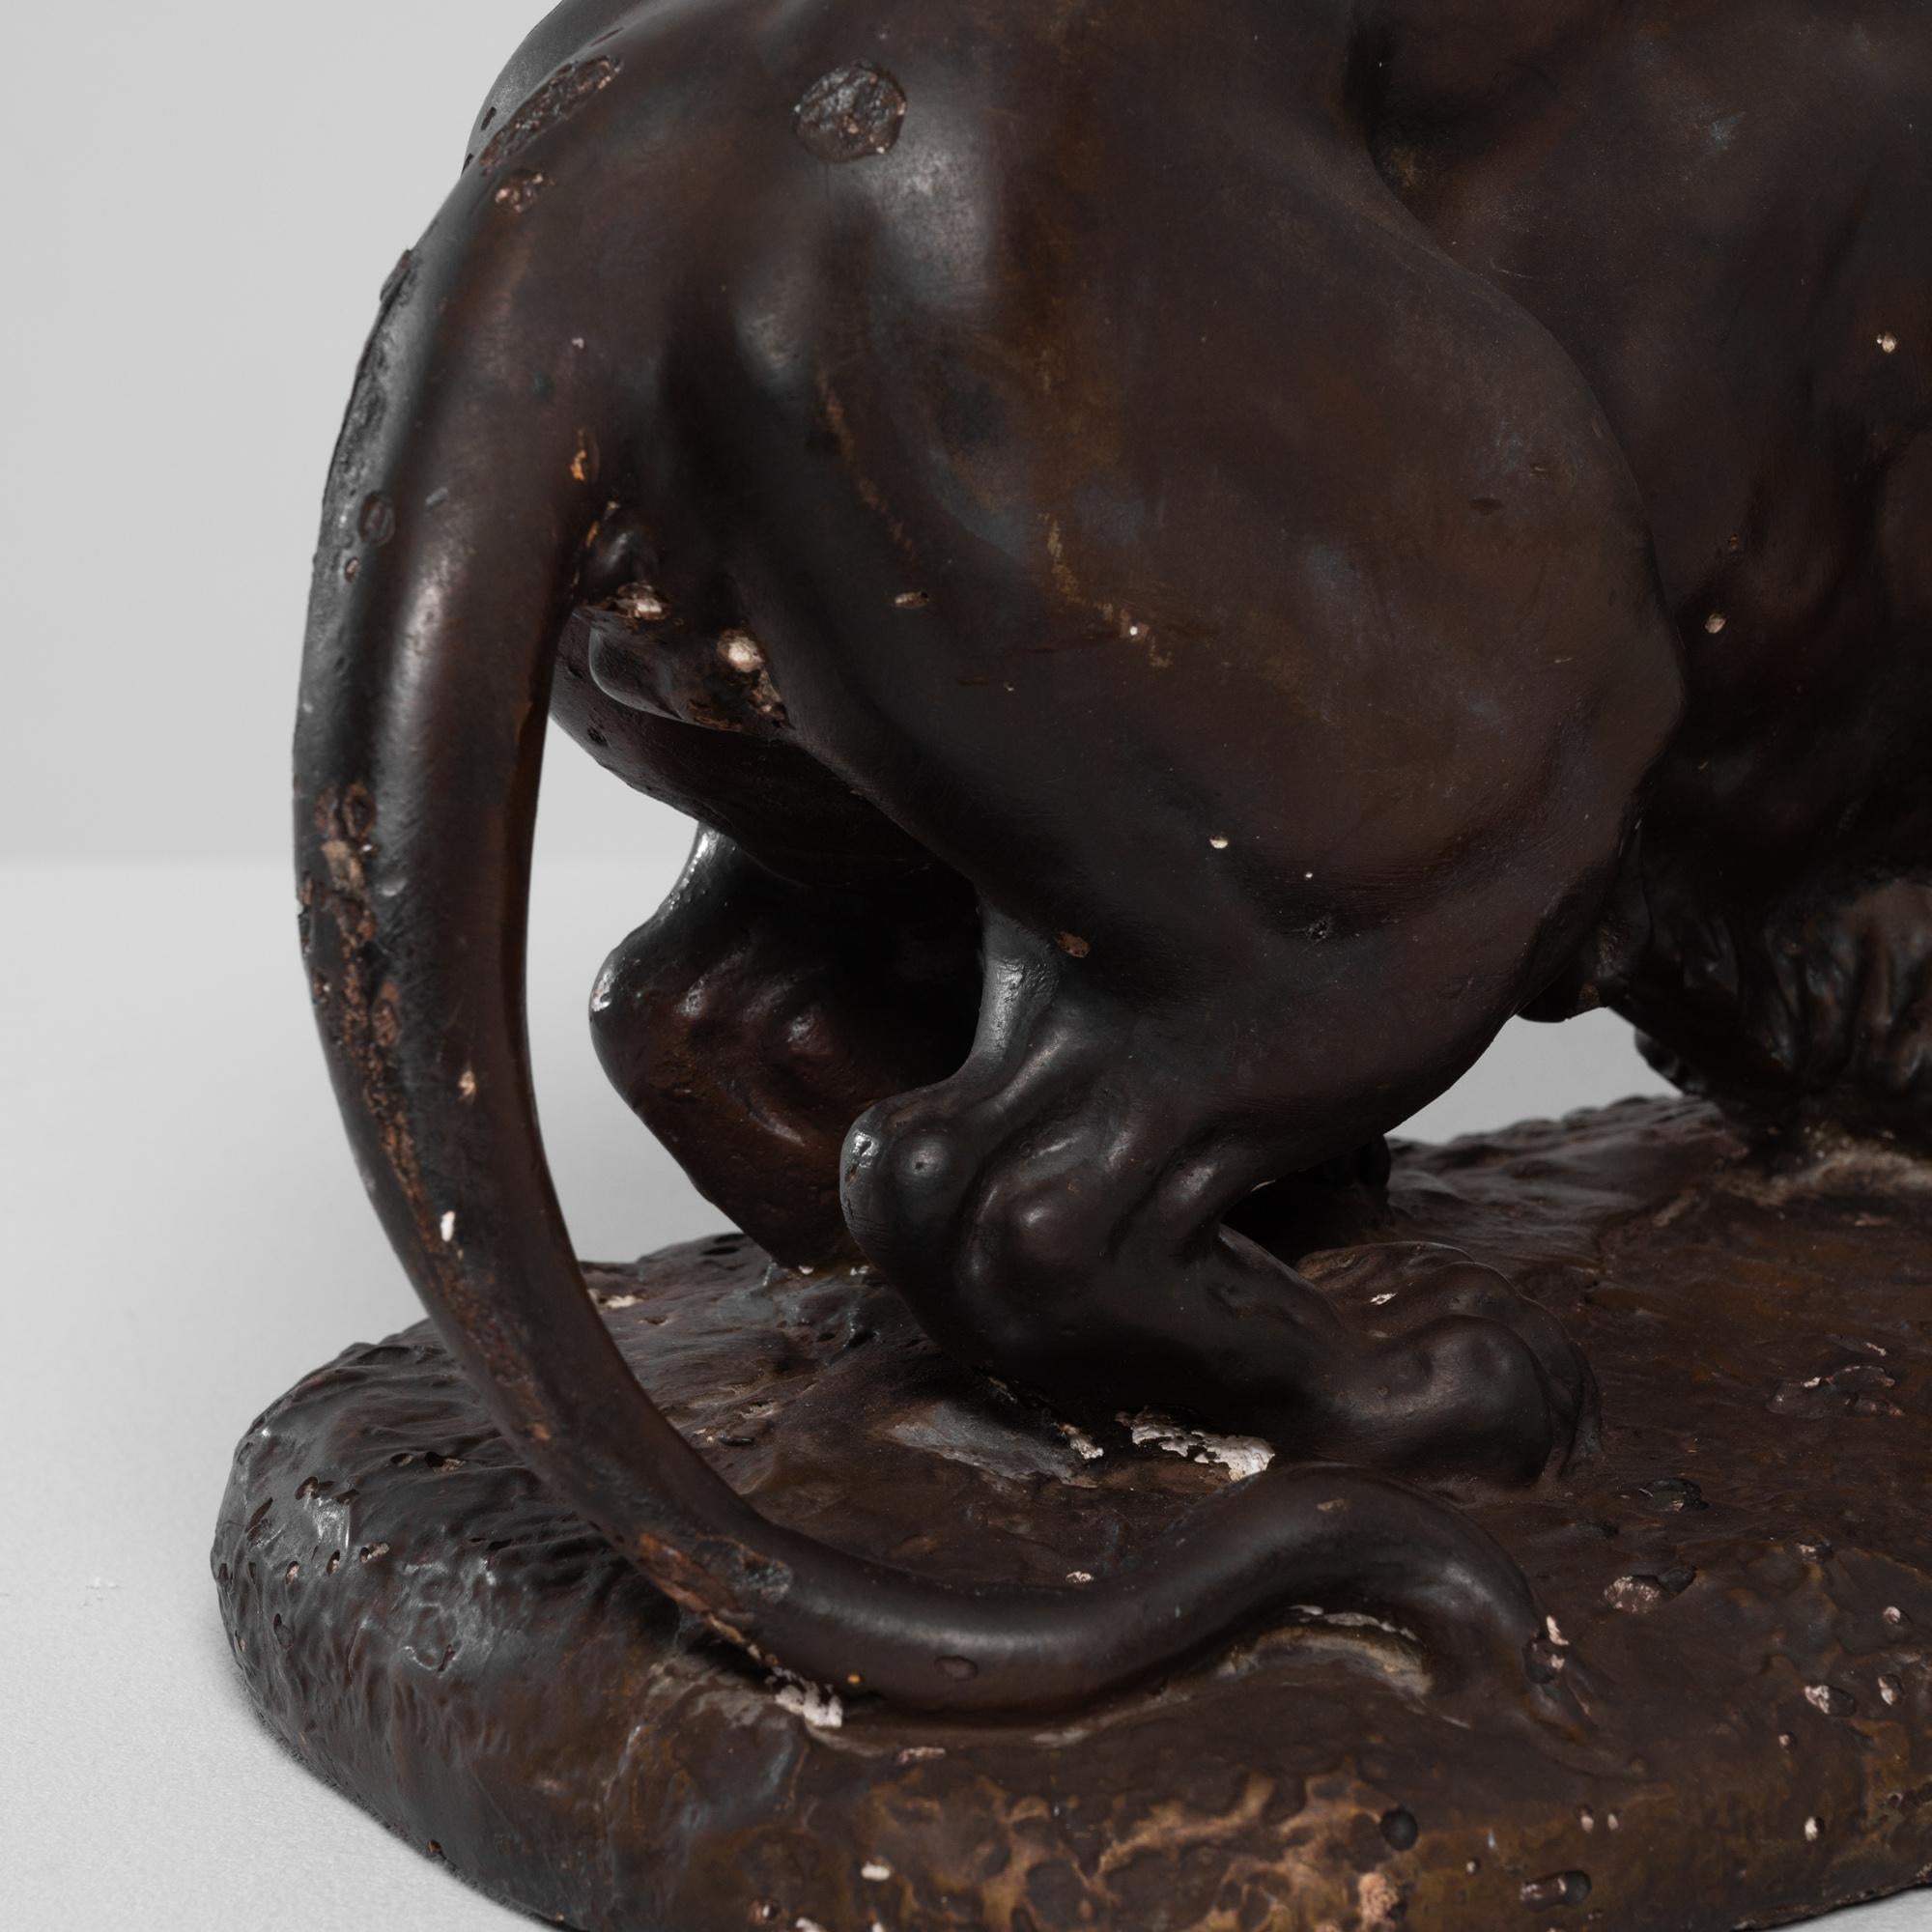 Capture the essence of majesty and strength with this Antique 1900s French Lion Plaster Sculpture. Standing in a dark finish, the sculpture portrays the regality and ferocity of a lion engaged in a battle. The intricate details bring the fierce